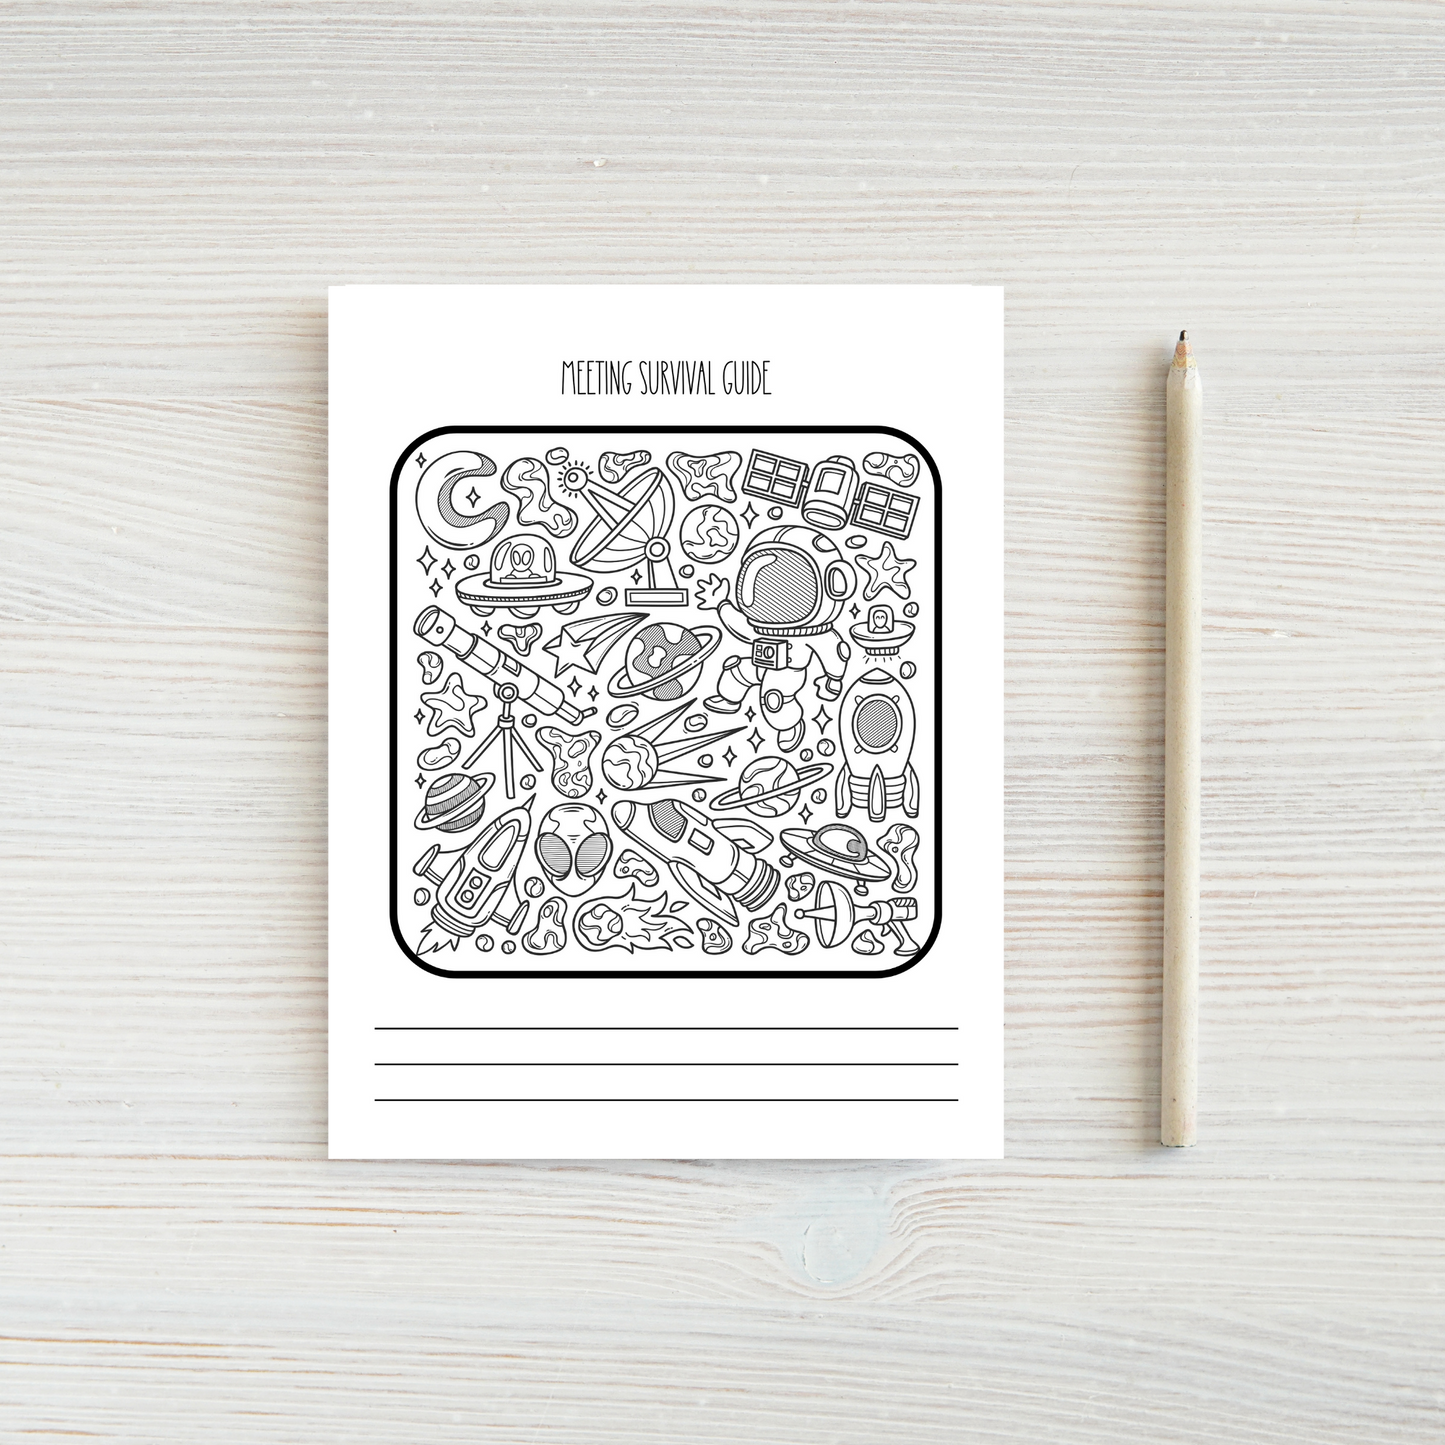 Meeting Survival Guide Doodle Notepad - Space Theme